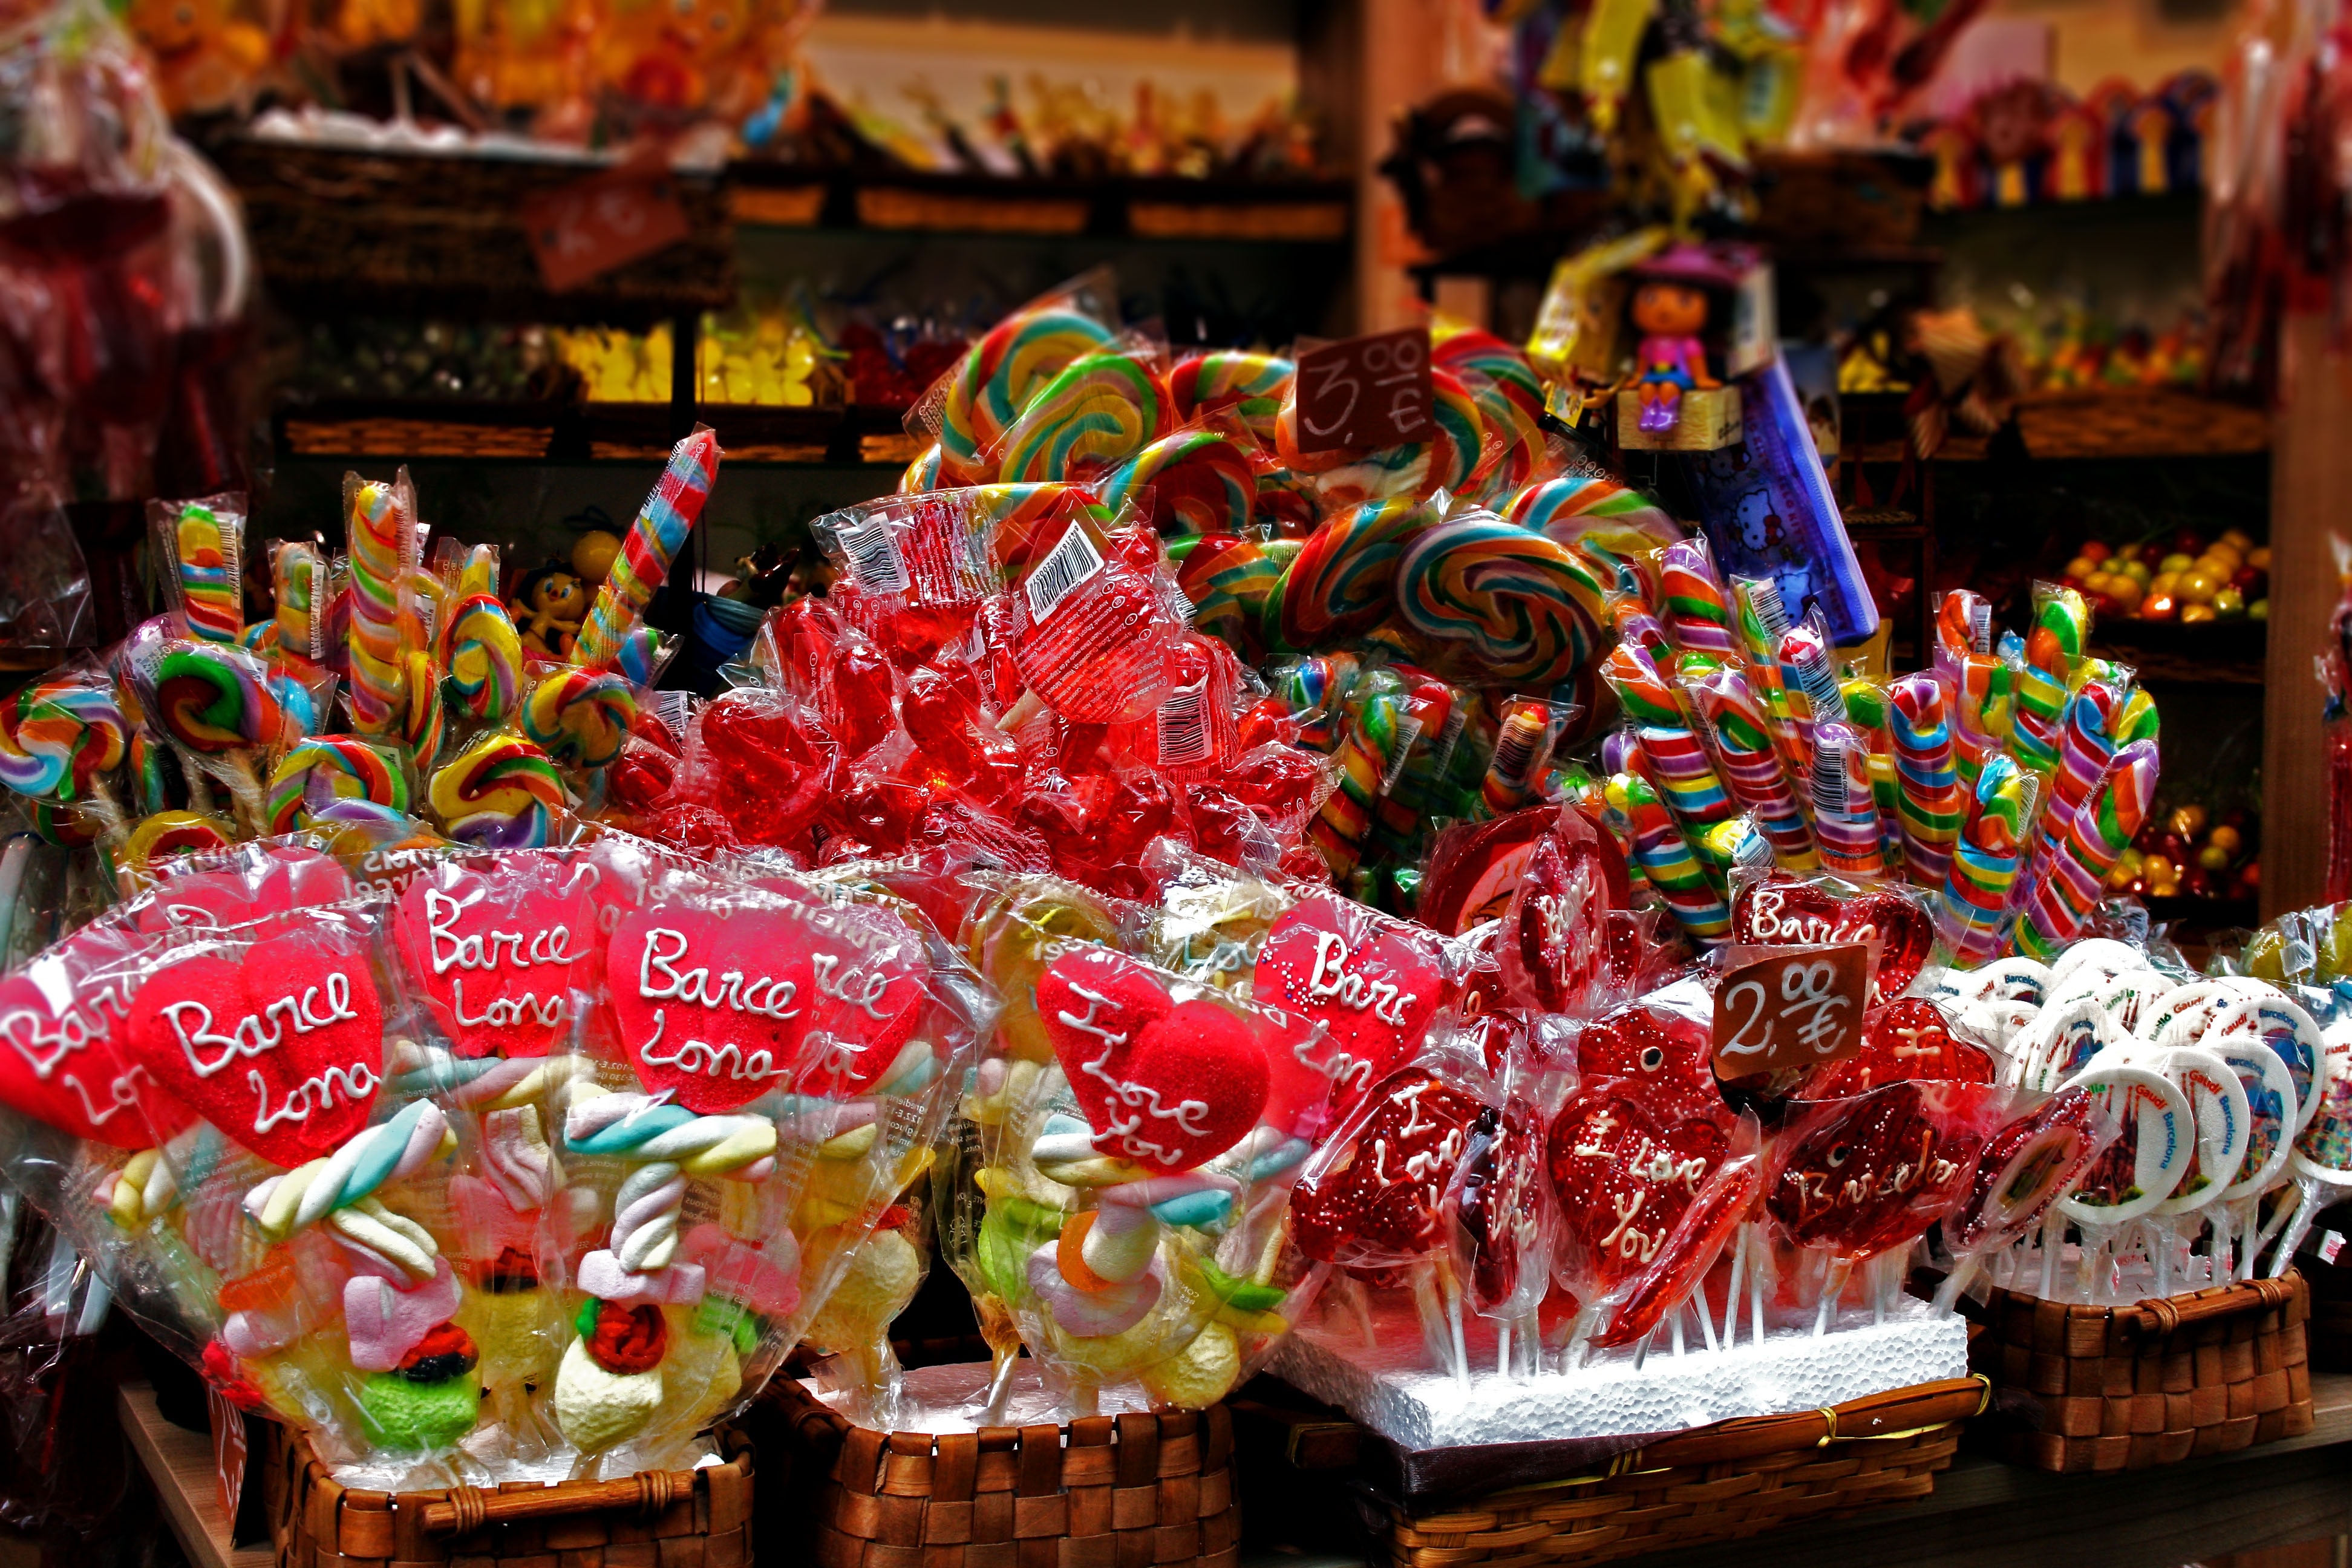 1920x1200 wallpaper | Sweet, Sweetness, Candy, Confectionery, retail ...